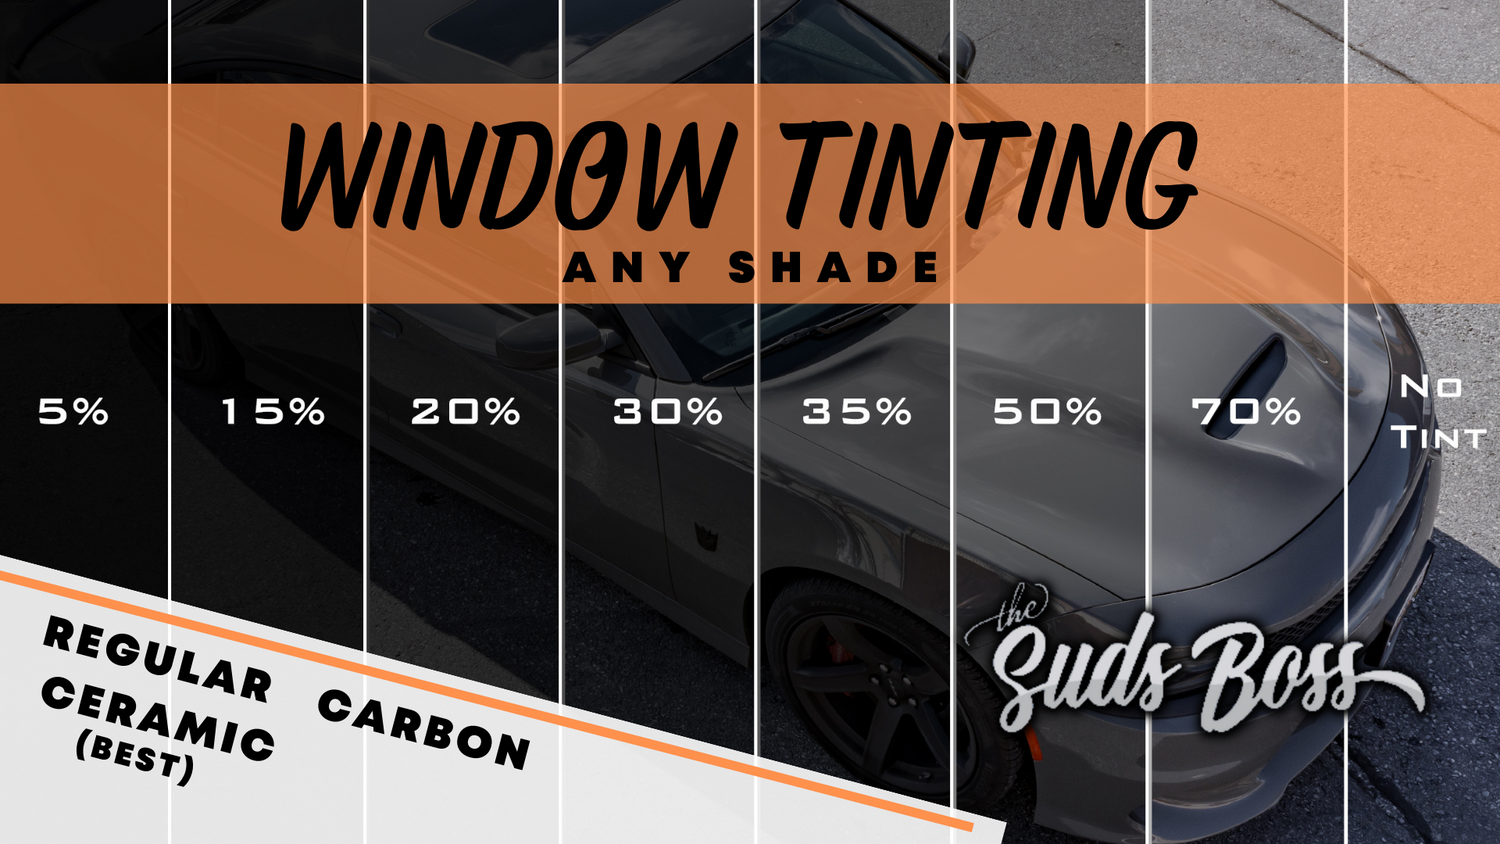 Suds Detailing  Auto Window Tint Services in Southern Illinois